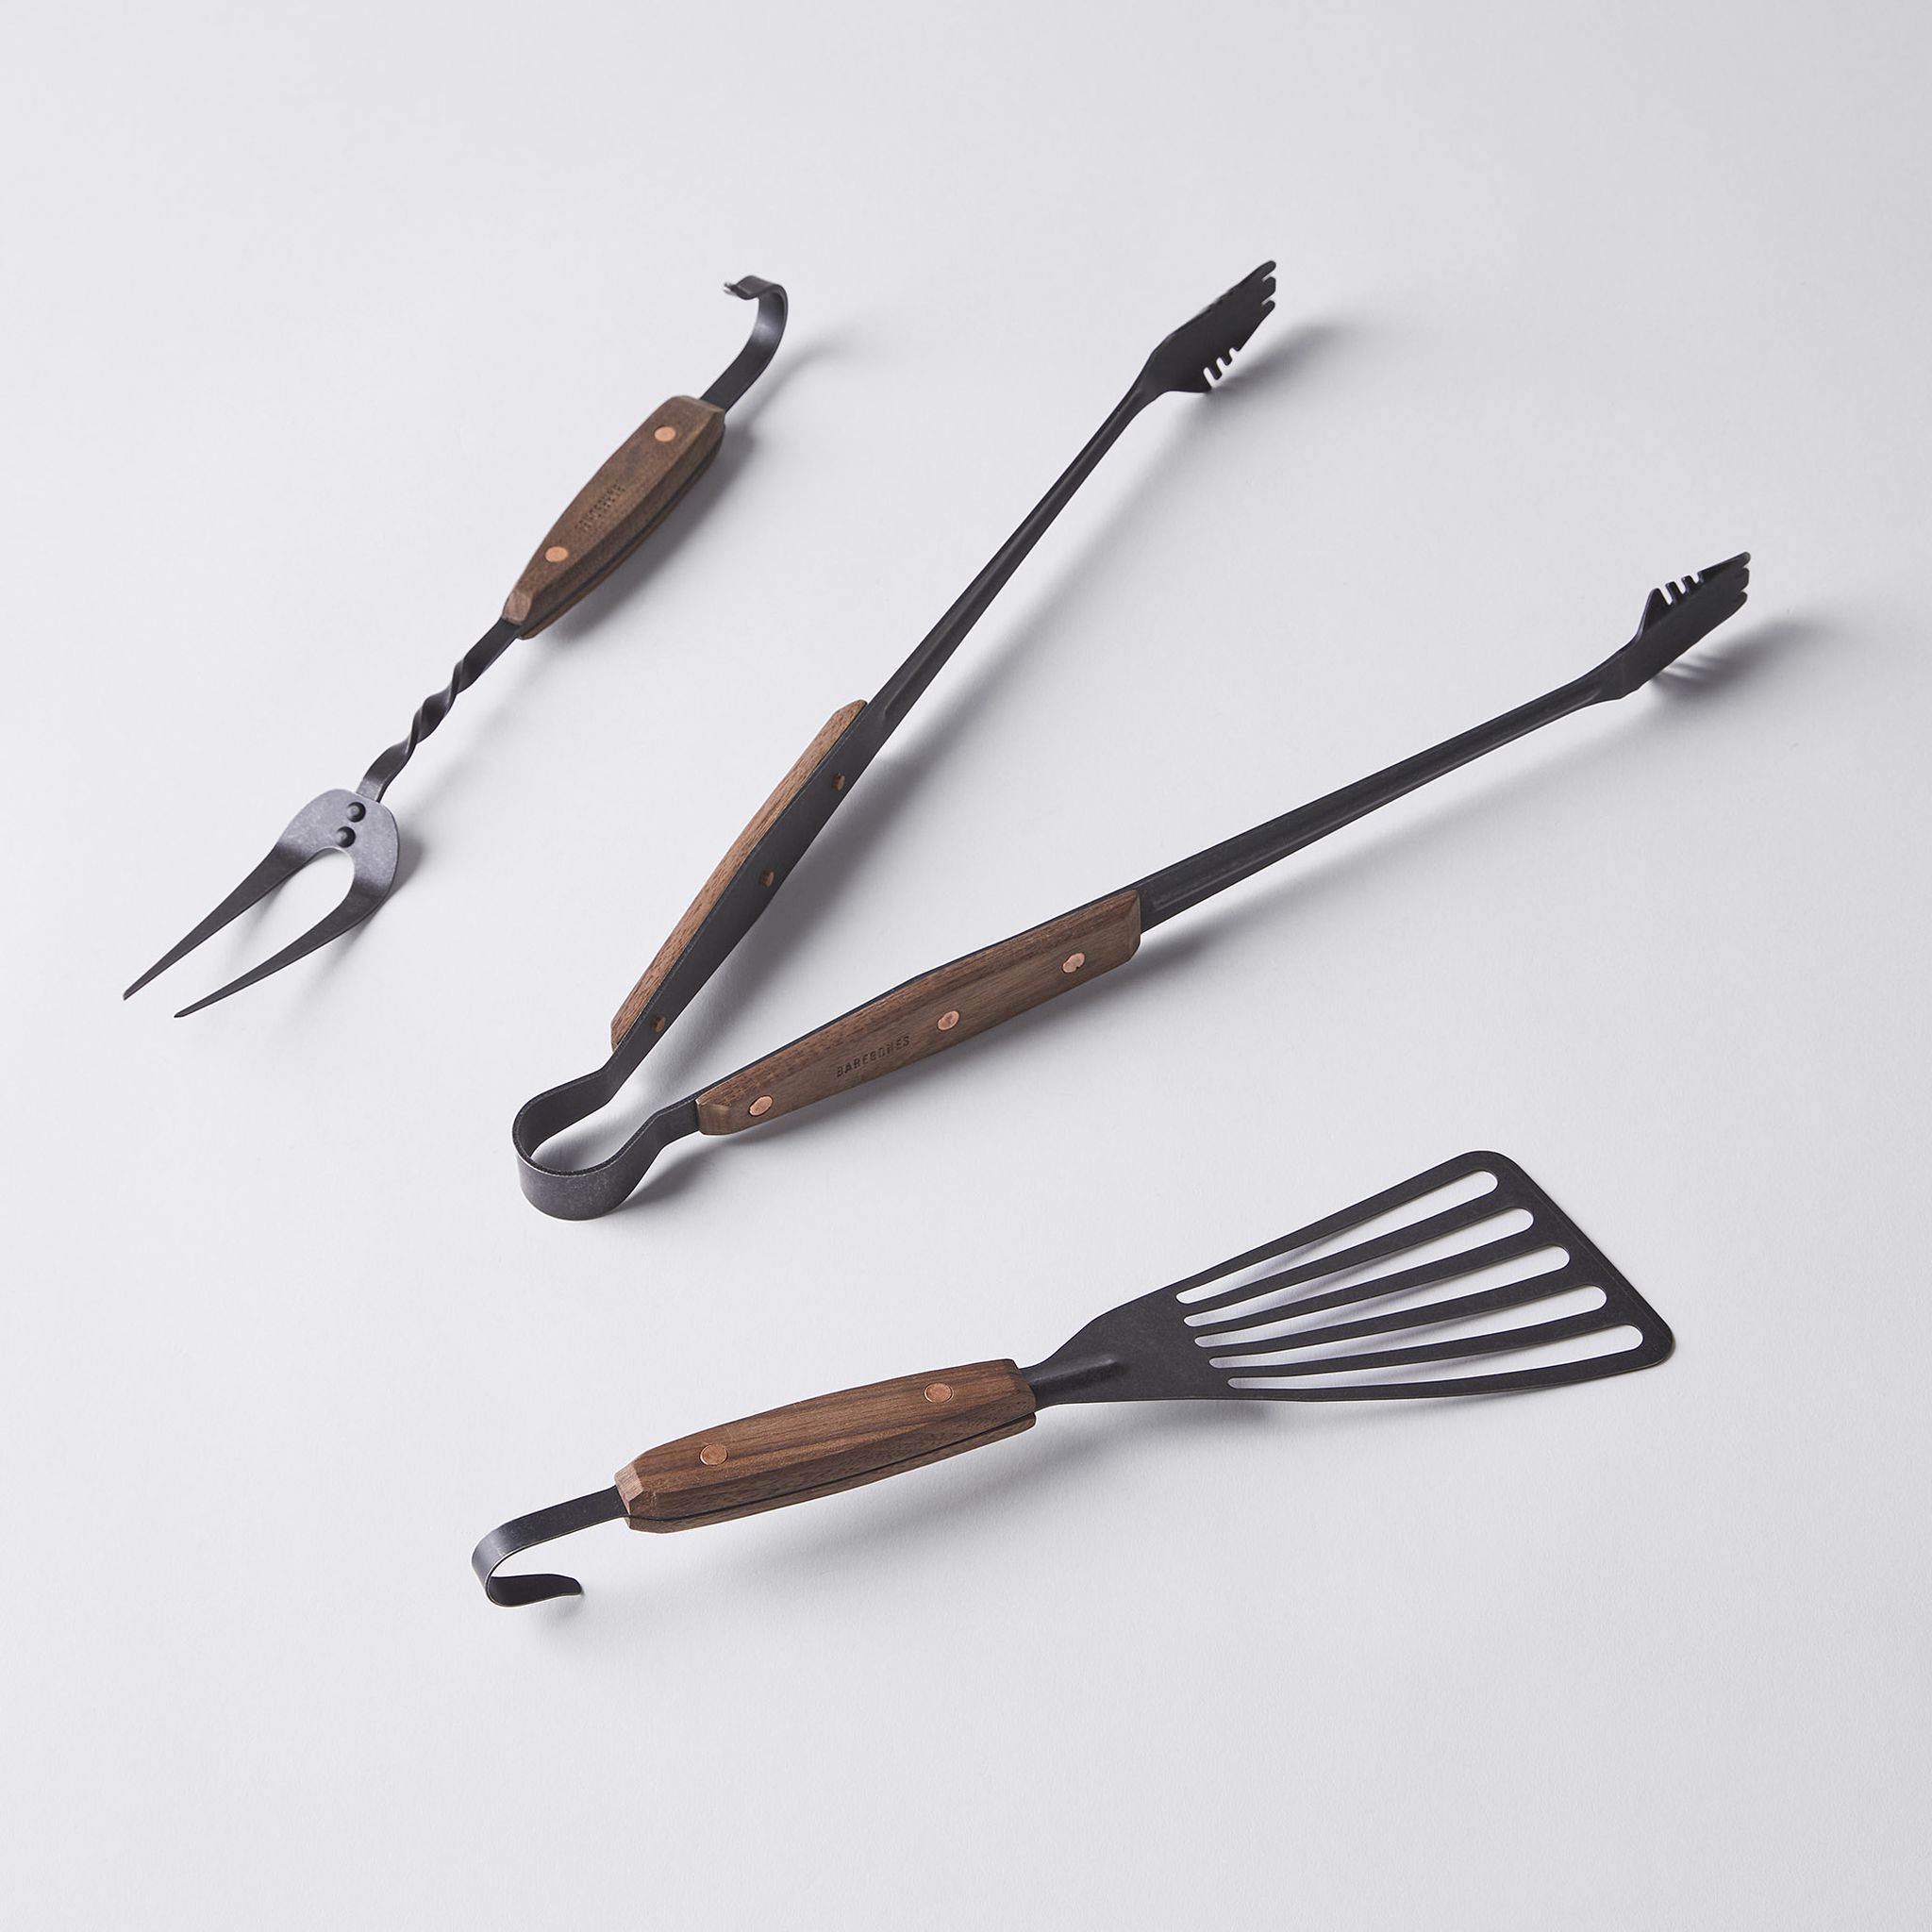 Wood-Handled Stainless Steel Grill Tools